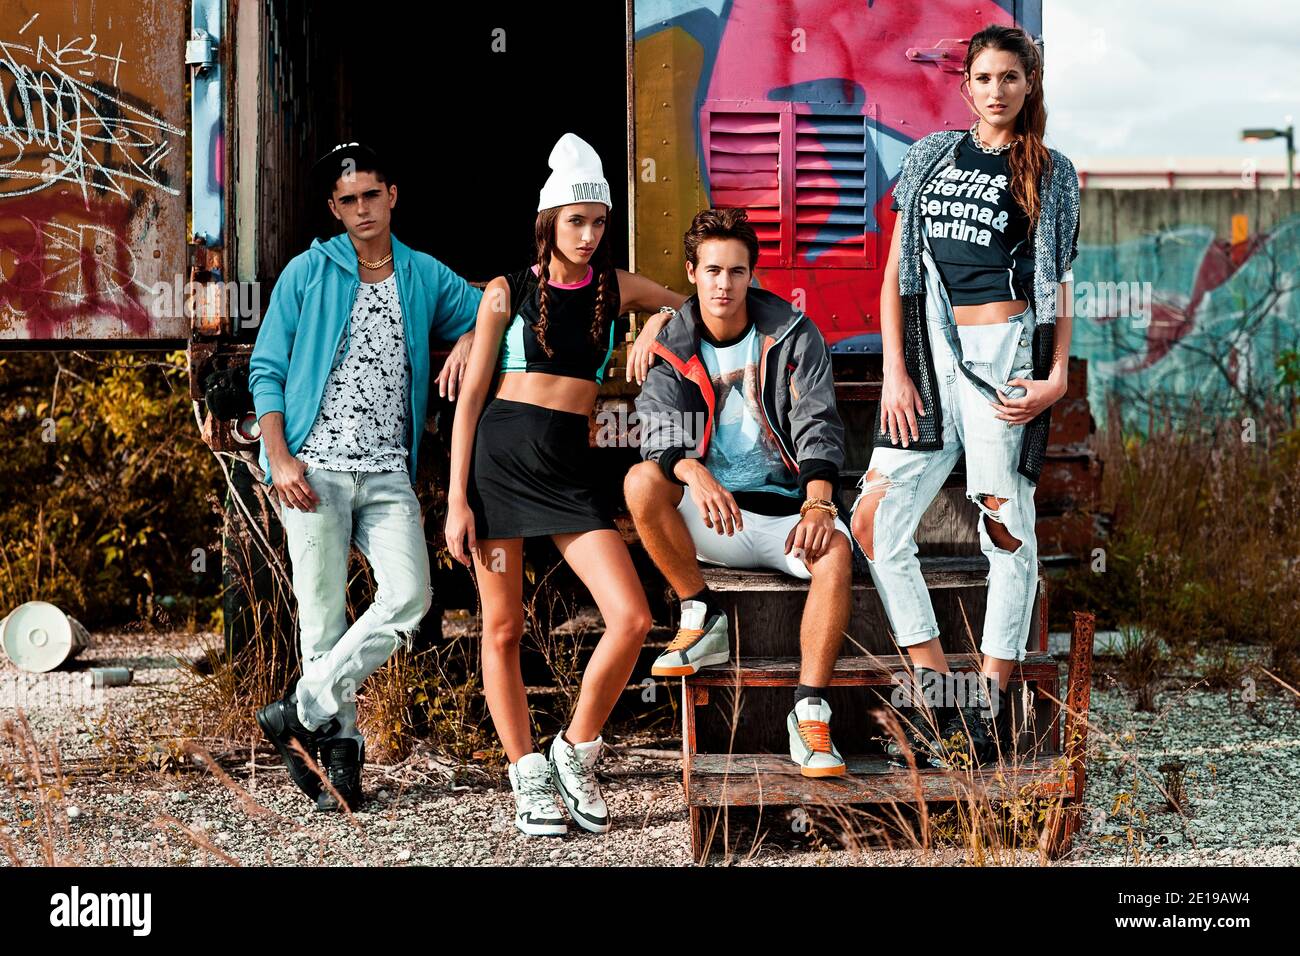 A portrait of an interracial group of 4 young adults lounging on wooden steps in front of an open graffiti sprayed container on a vacant lot. Stock Photo